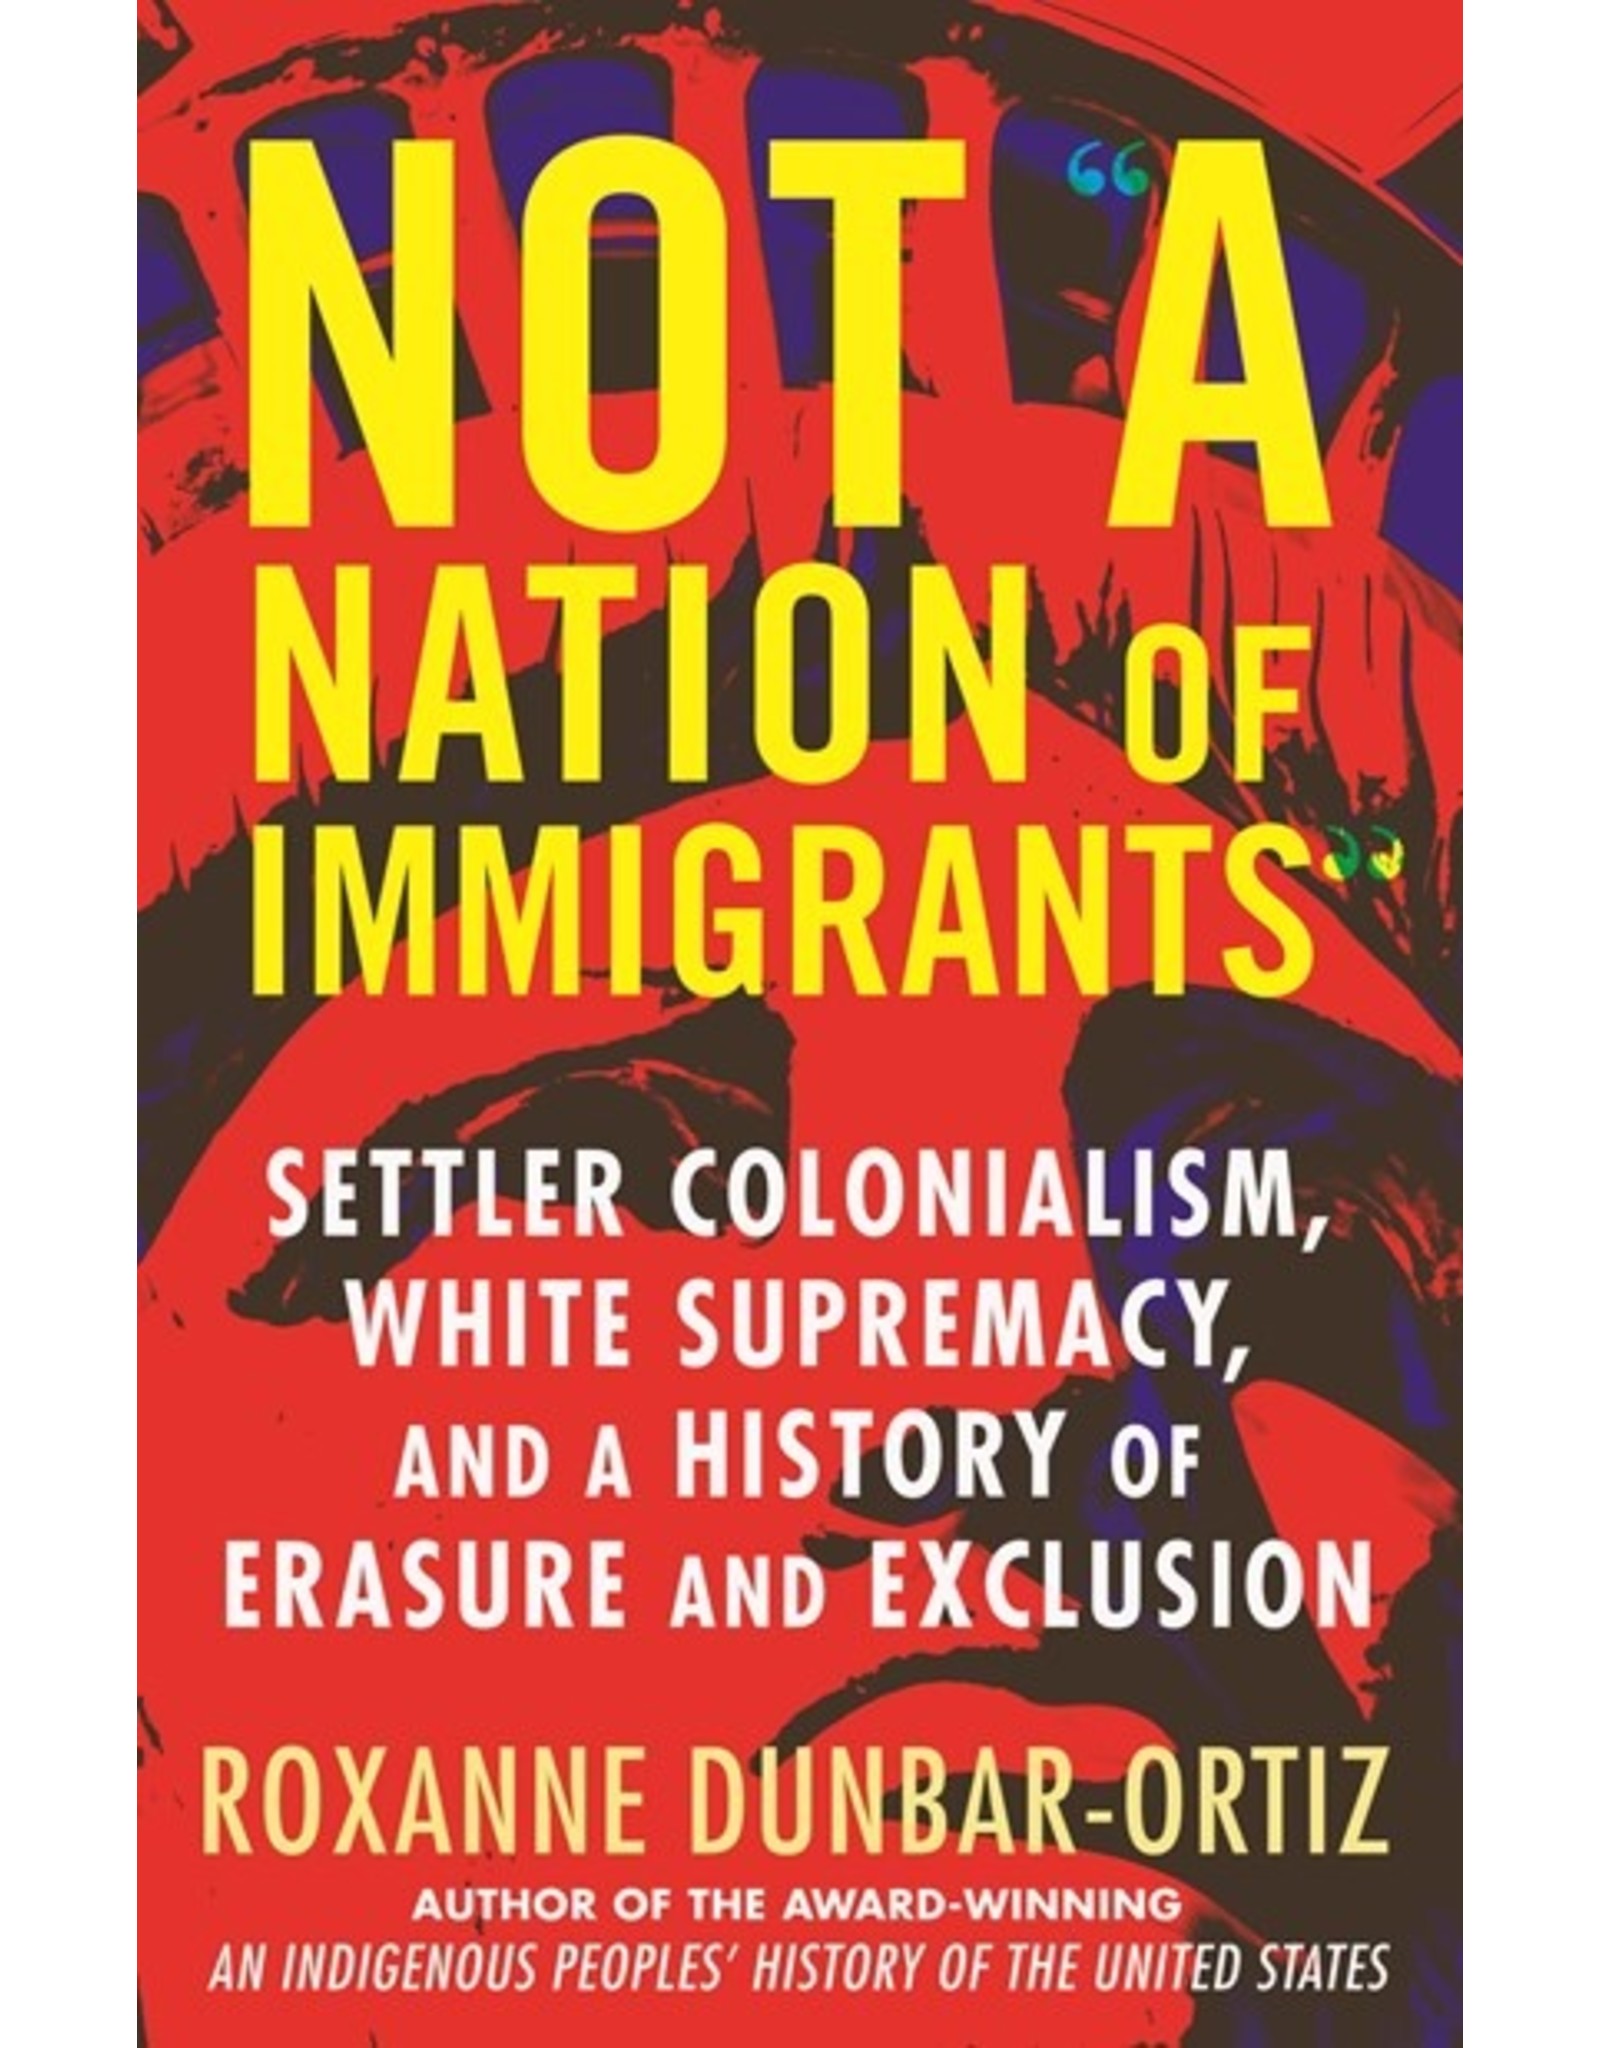 Books Not A Nation of Immigrants: Settler Colonialism, White Supremacy, and a History of Erasure and Exclusion by Roxanne Dunbar-Ortiz